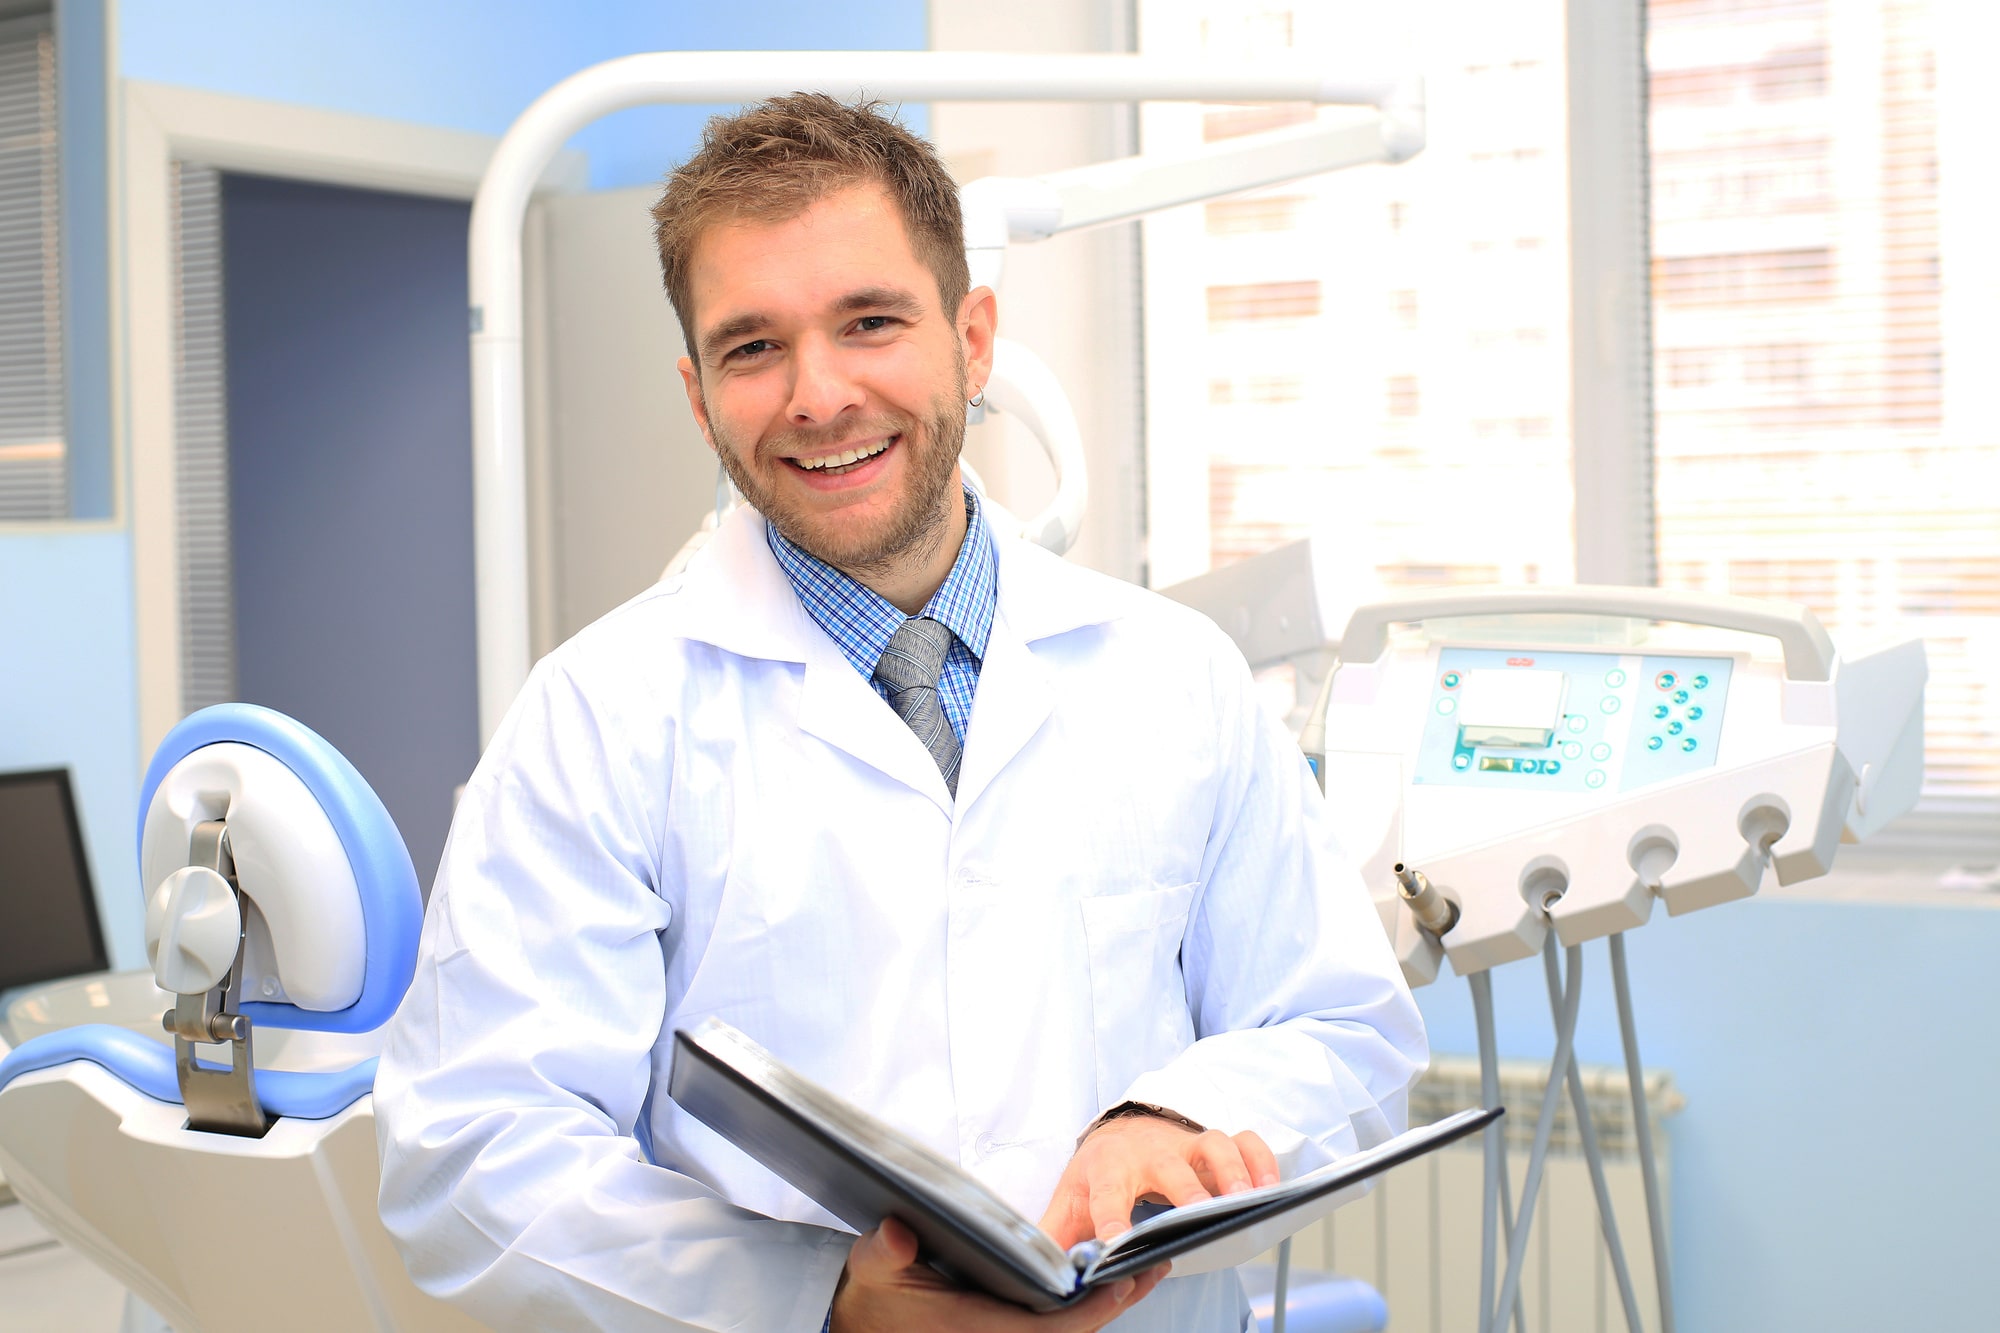 The Main Steps to Starting a Dental Practice